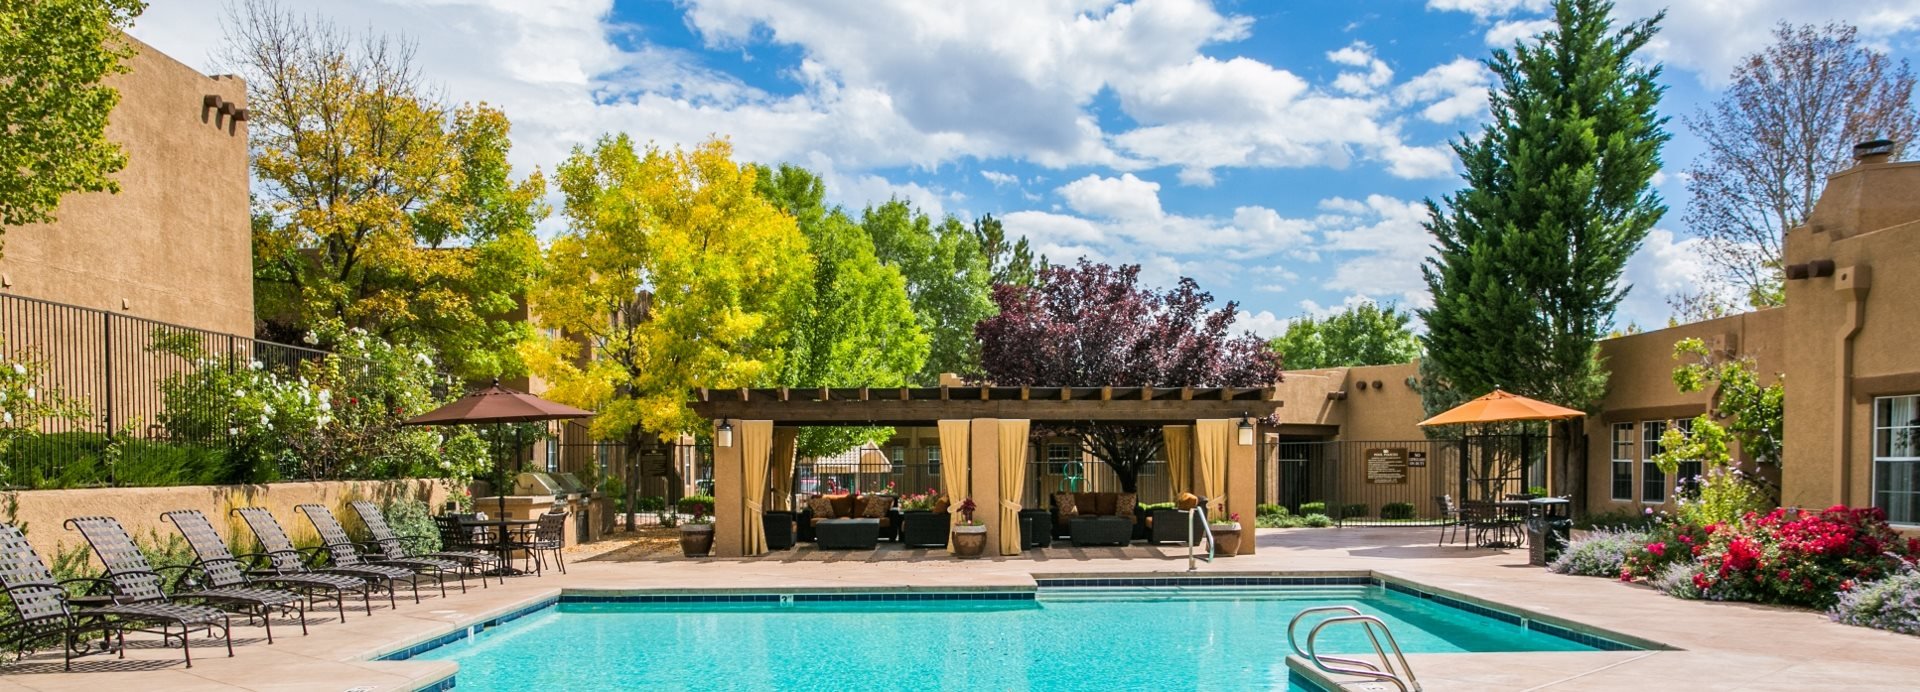 Pool with Sundeck and Lounge Seating in Santa Fe